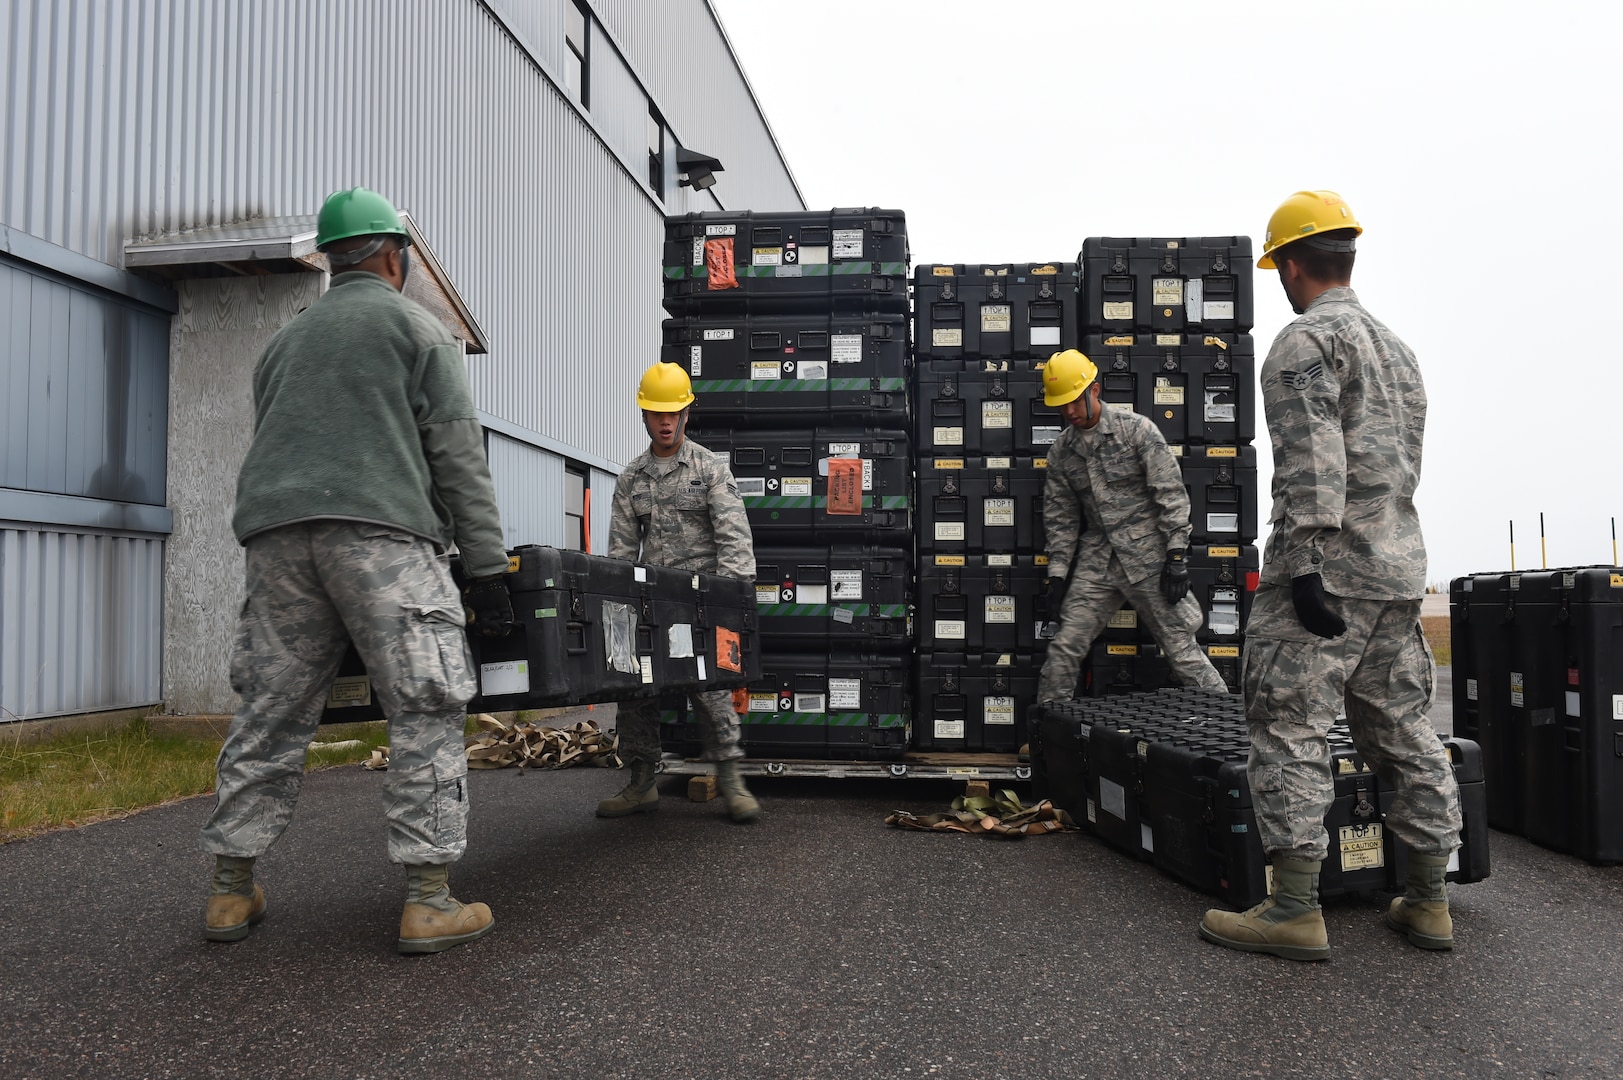 Airmen assigned to the 52nd Combat Communications Squadron move cases of communication equipment during Vigilant Shield 16 at 5 Wing Goose Bay, Canada, Oct. 10, 2015. From October 15-26, 2015 approximately 700 members from the Canadian Armed Forces, the United States Air Force, the United States Navy, and the United States Air National Guard are deploying to Iqualuit, Nunavut, and 5 Wing Goose Bay, Newfoundland and Labrador for Exercise Vigilant Shield 16. (U.S. Air Force photo by Senior Airman Jasmonet Jackson/ Released)